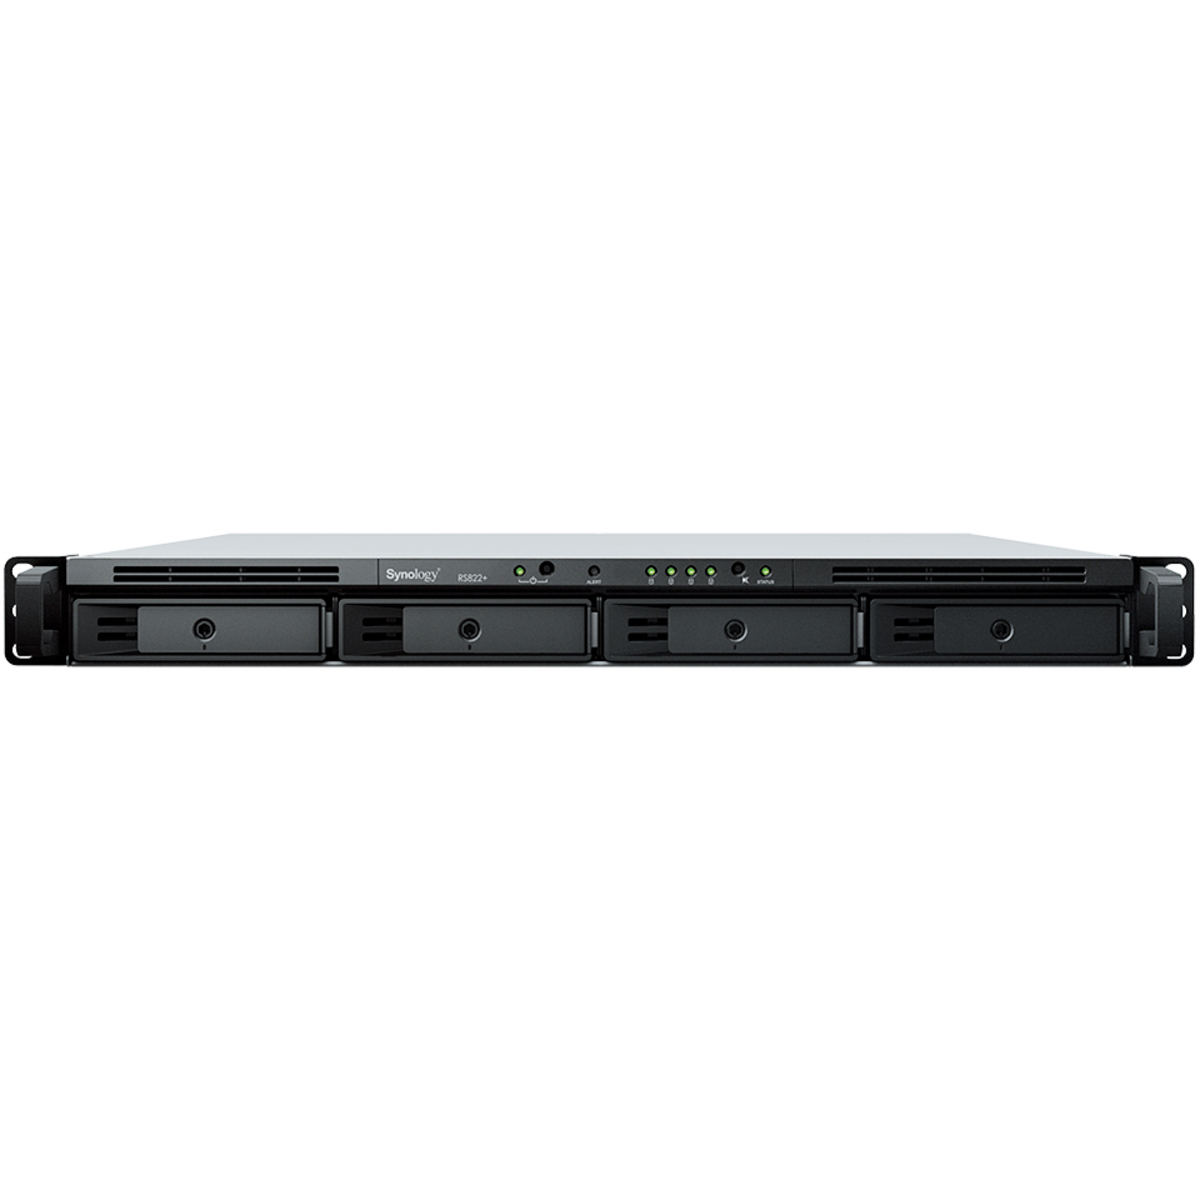 Synology RackStation RS822+ 4tb 4-Bay RackMount Multimedia / Power User / Business NAS - Network Attached Storage Device 2x2tb Western Digital Gold WD2005FBYZ 3.5 7200rpm SATA 6Gb/s HDD ENTERPRISE Class Drives Installed - Burn-In Tested RackStation RS822+